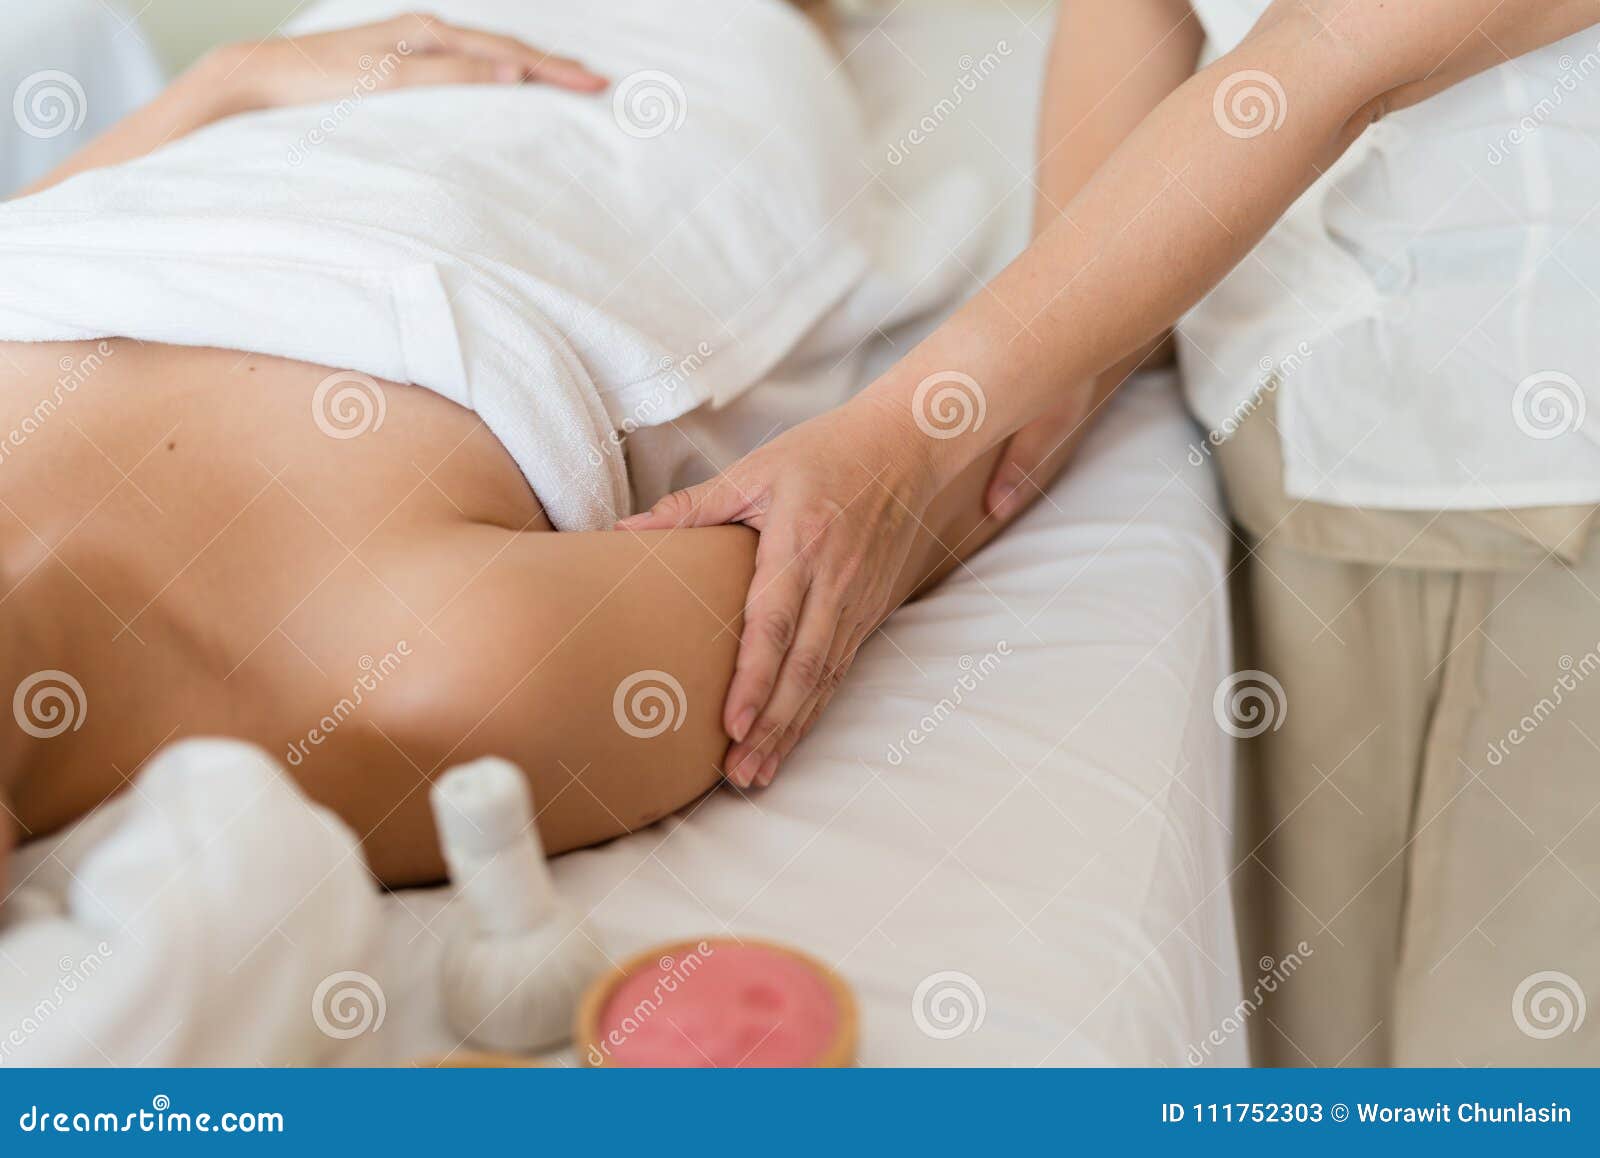 https://thumbs.dreamstime.com/z/asian-girl-relaxing-having-arm-massage-spa-salon-close-up-view-asian-girl-relaxing-having-arm-massage-spa-salon-close-up-111752303.jpg